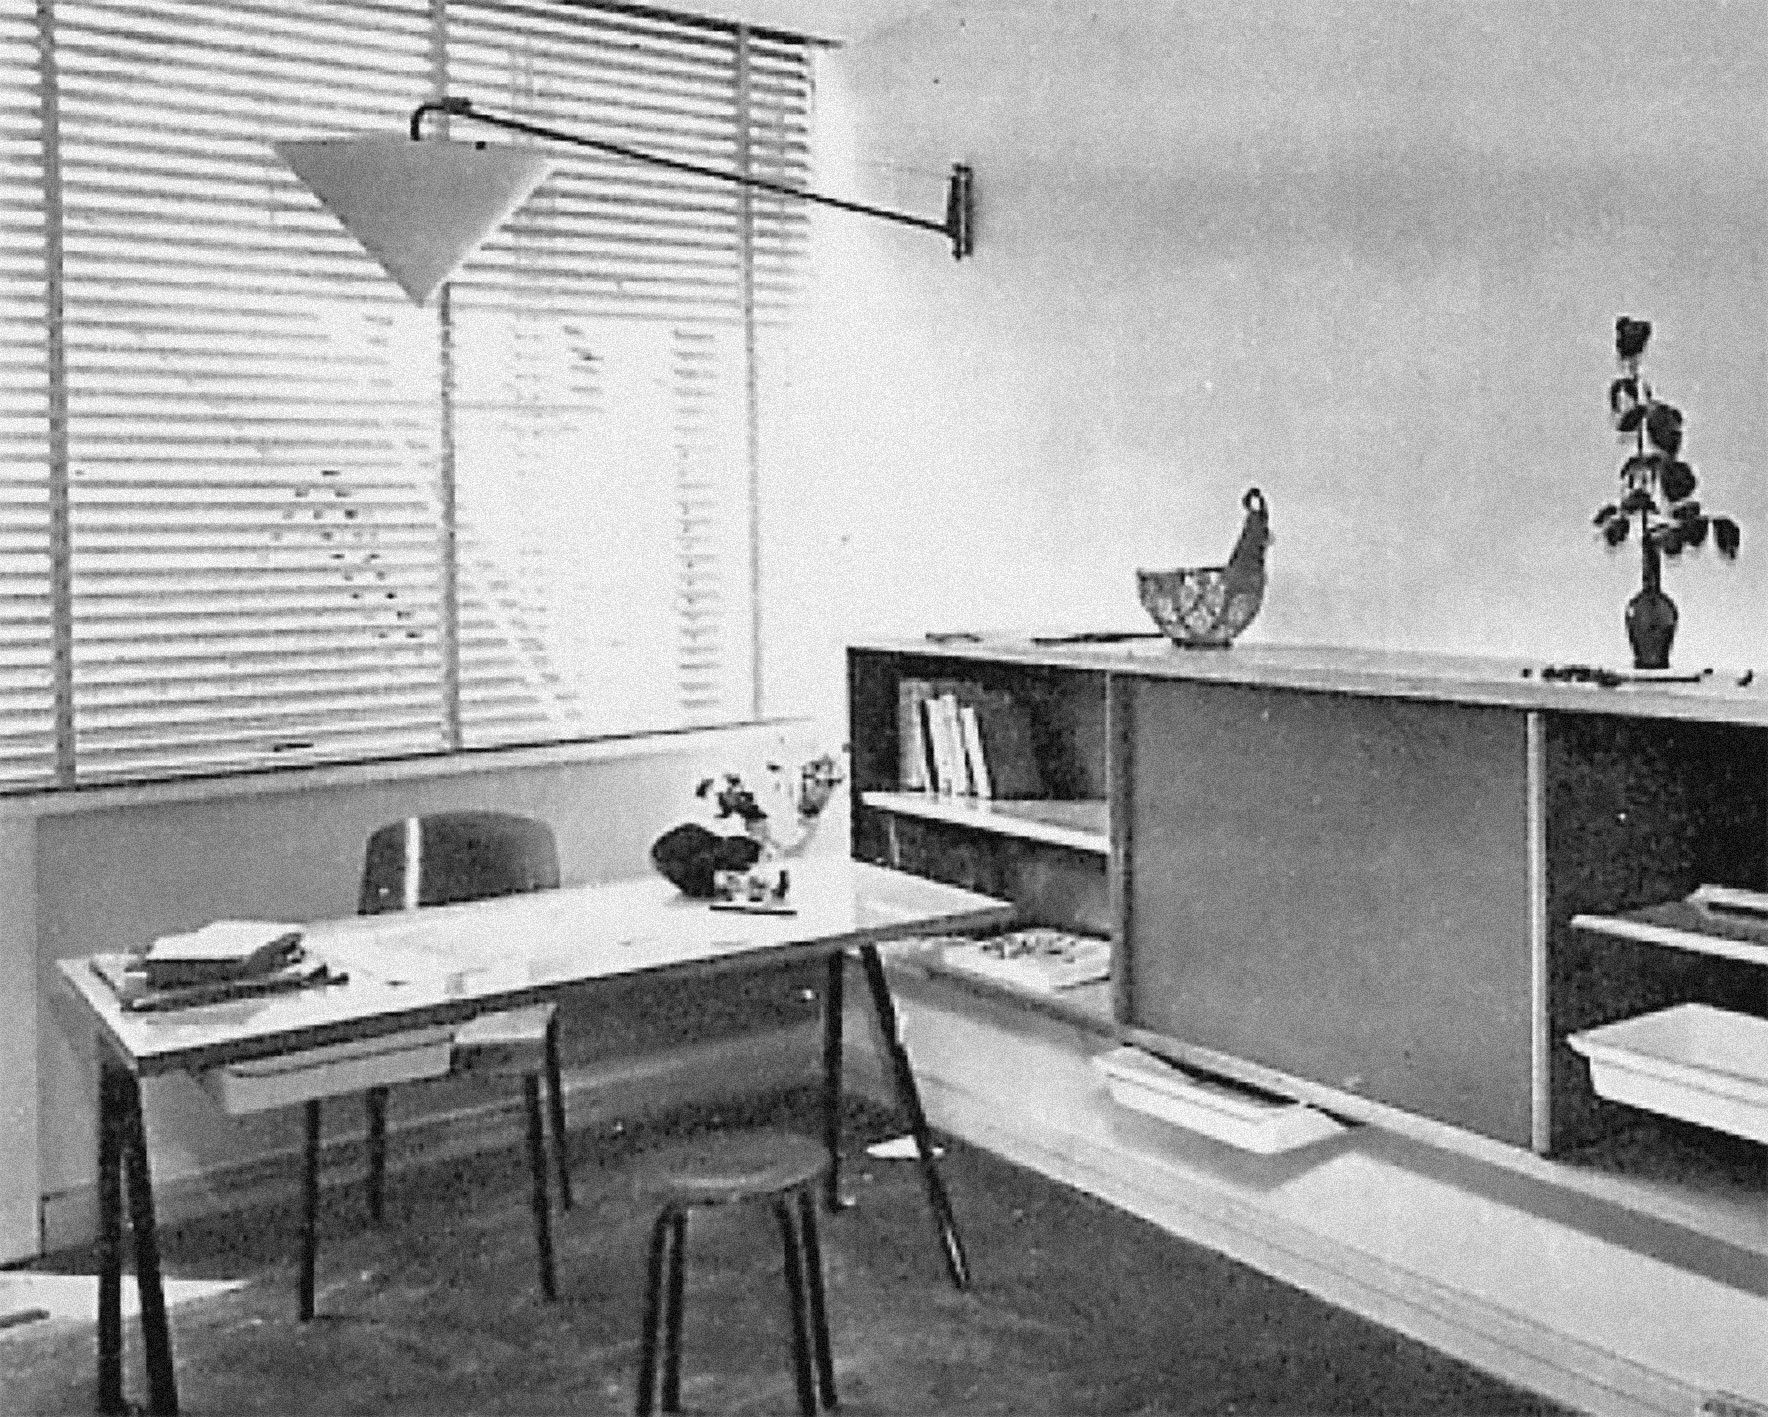 Cité Universitaire, Antony (architects E. Beaudouin and P. Fournier, 1951–1957). One of the 150 single rooms furnished by the Prouvé-Perriand-Villiger team, 1955.